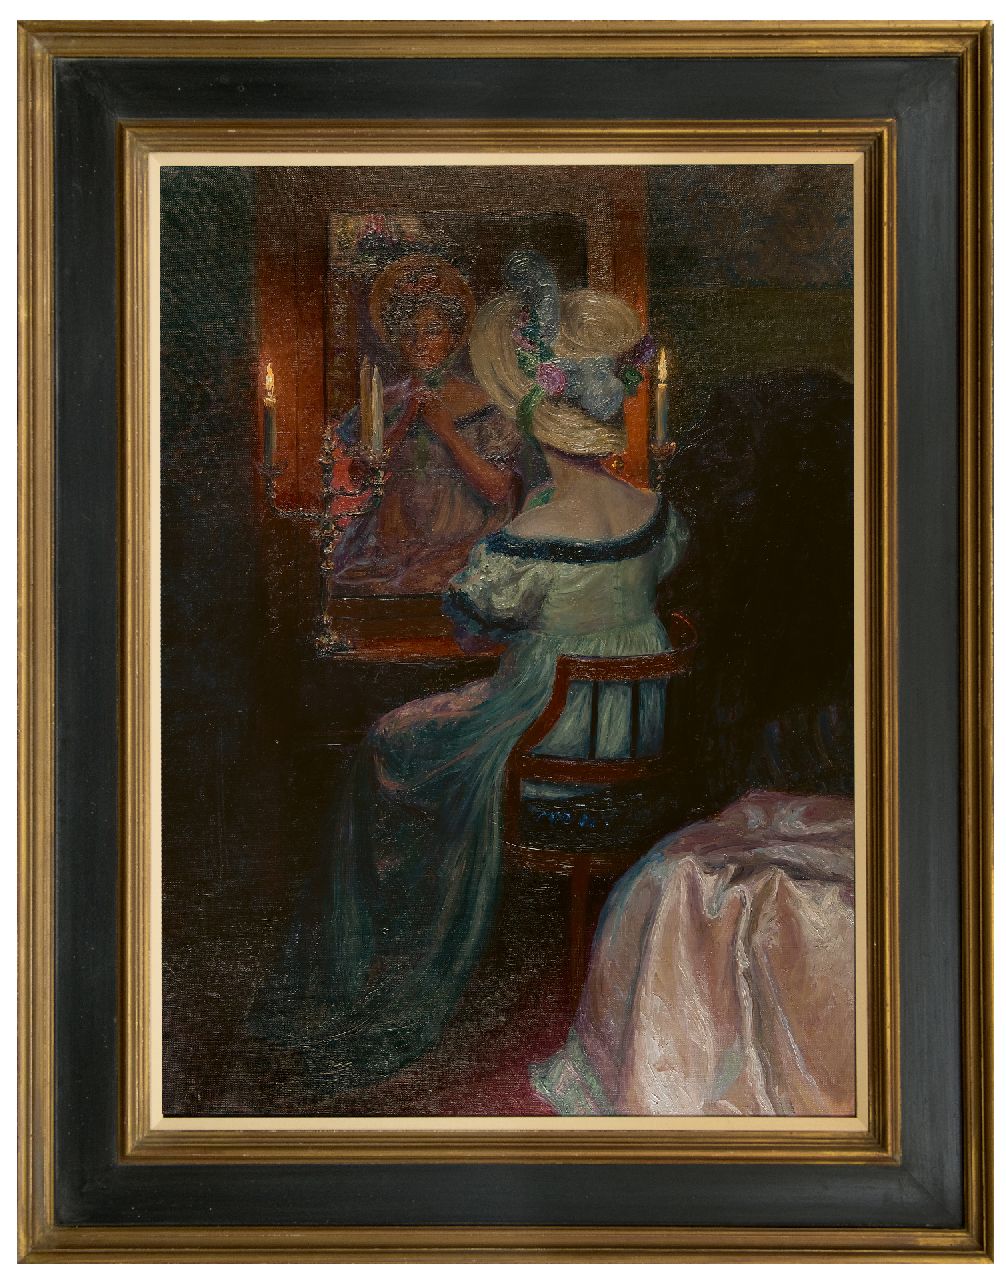 Kupelwieser I.  | Ida Kupelwieser | Paintings offered for sale | In front of the mirror, oil on canvas 110.5 x 80.3 cm, painted ca. 1910